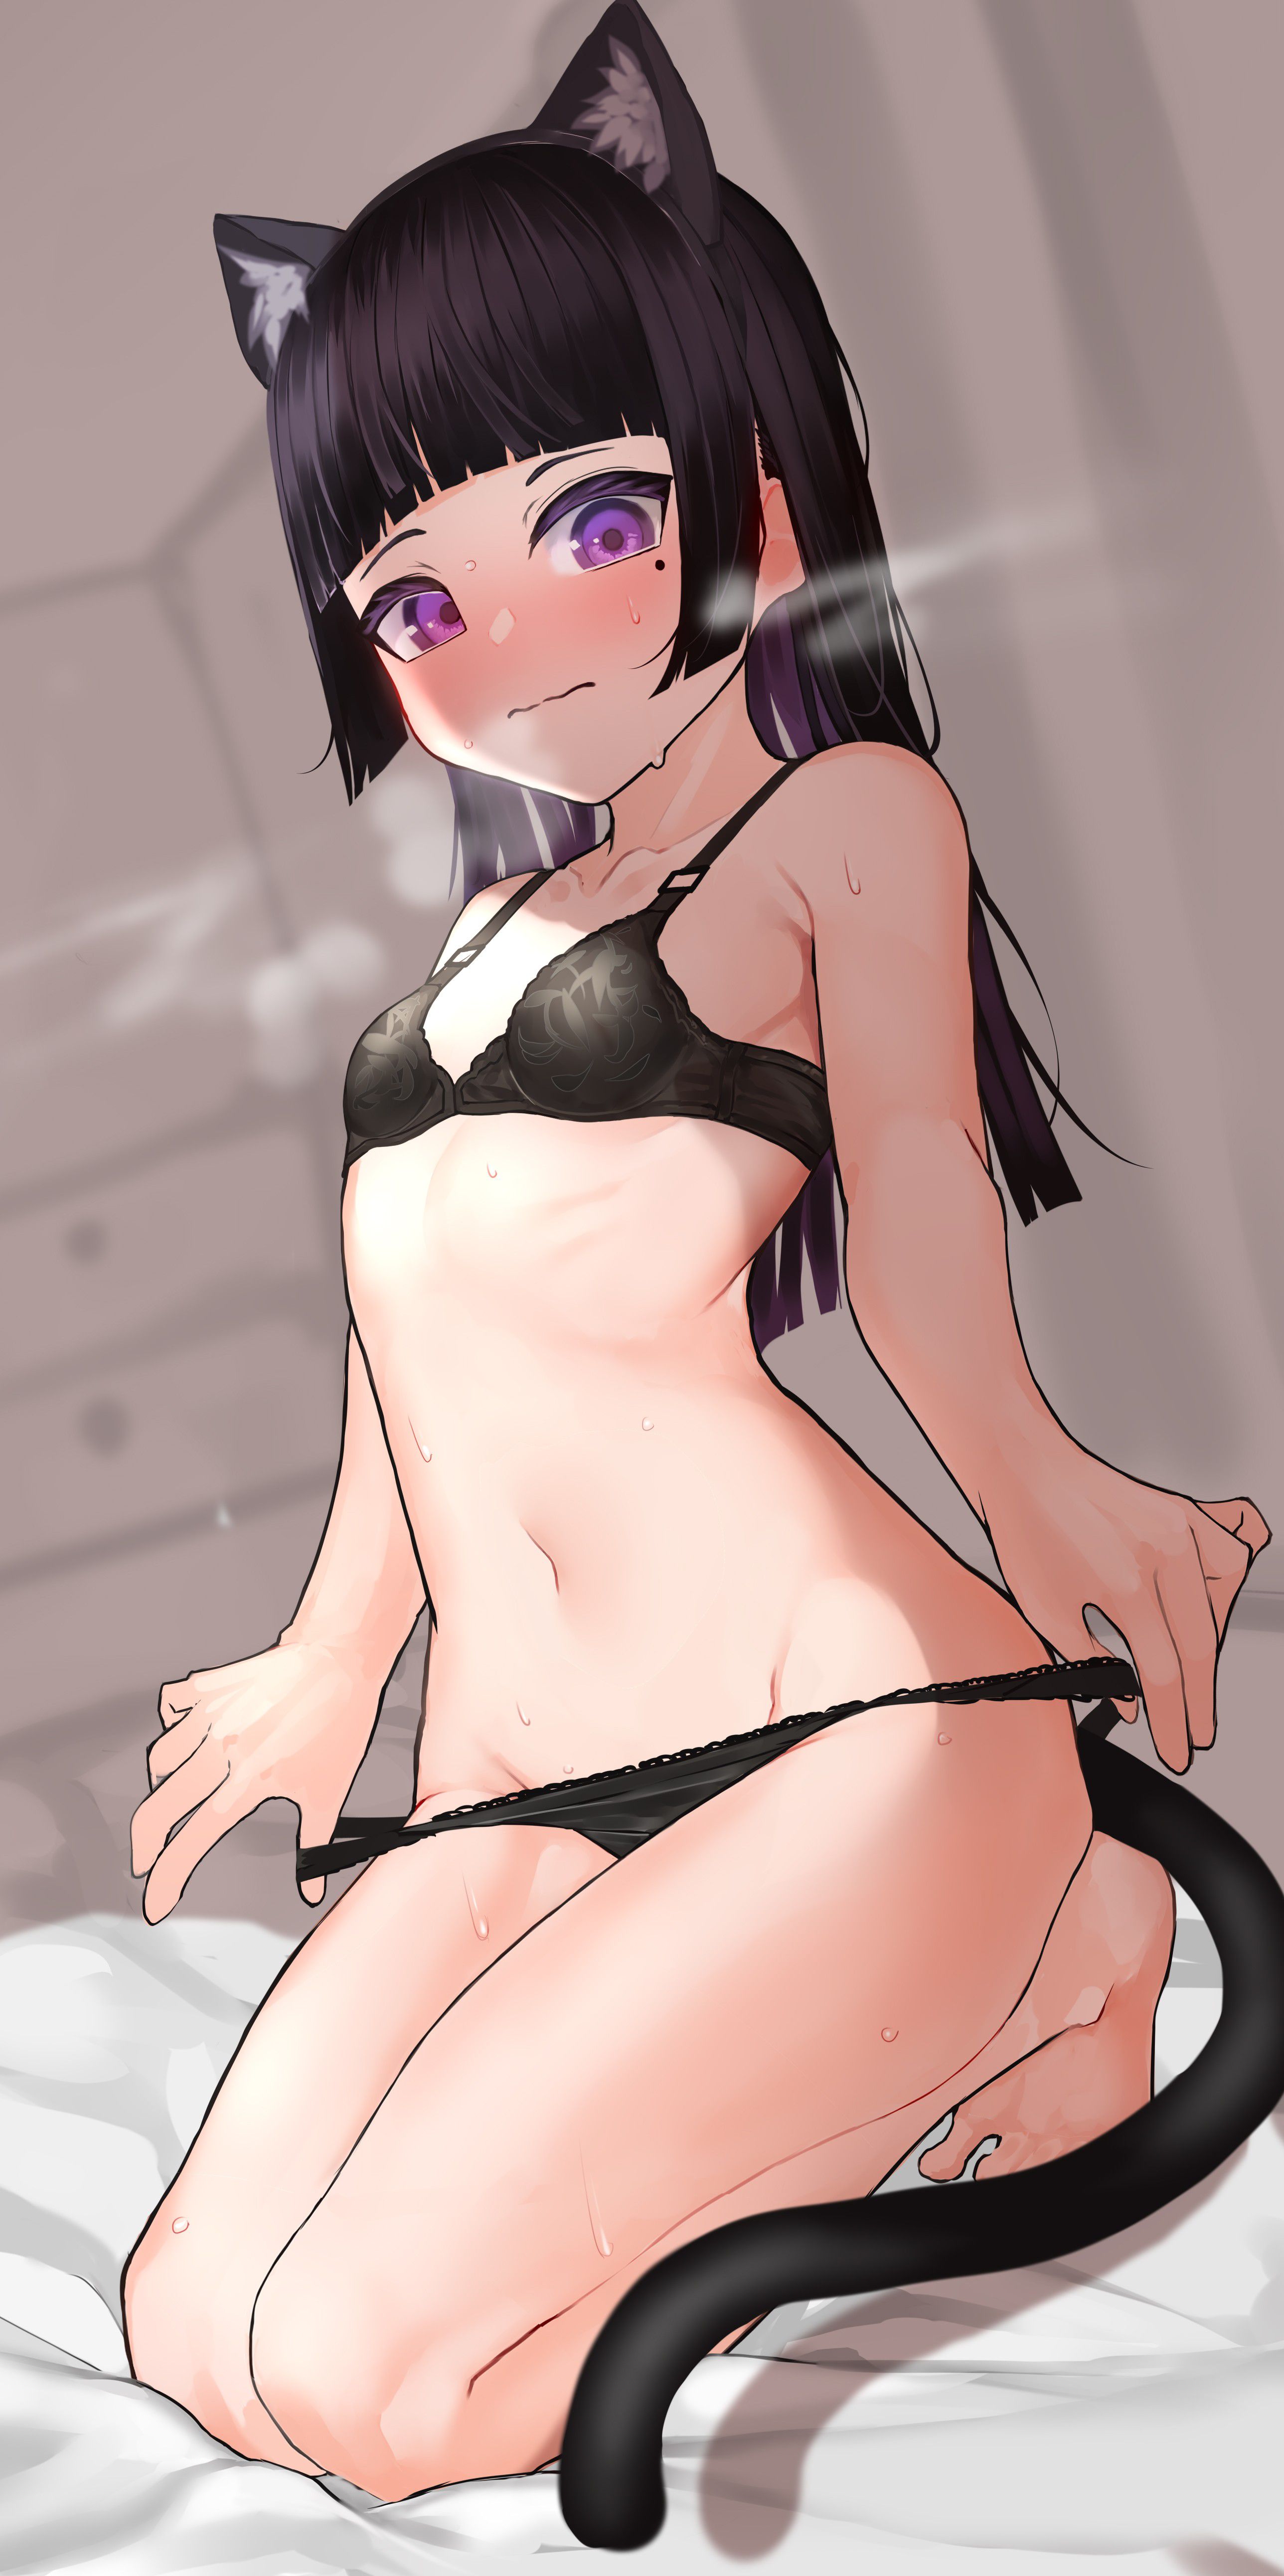 【2nd】Erotic image of a girl in black underwear Part 39 23